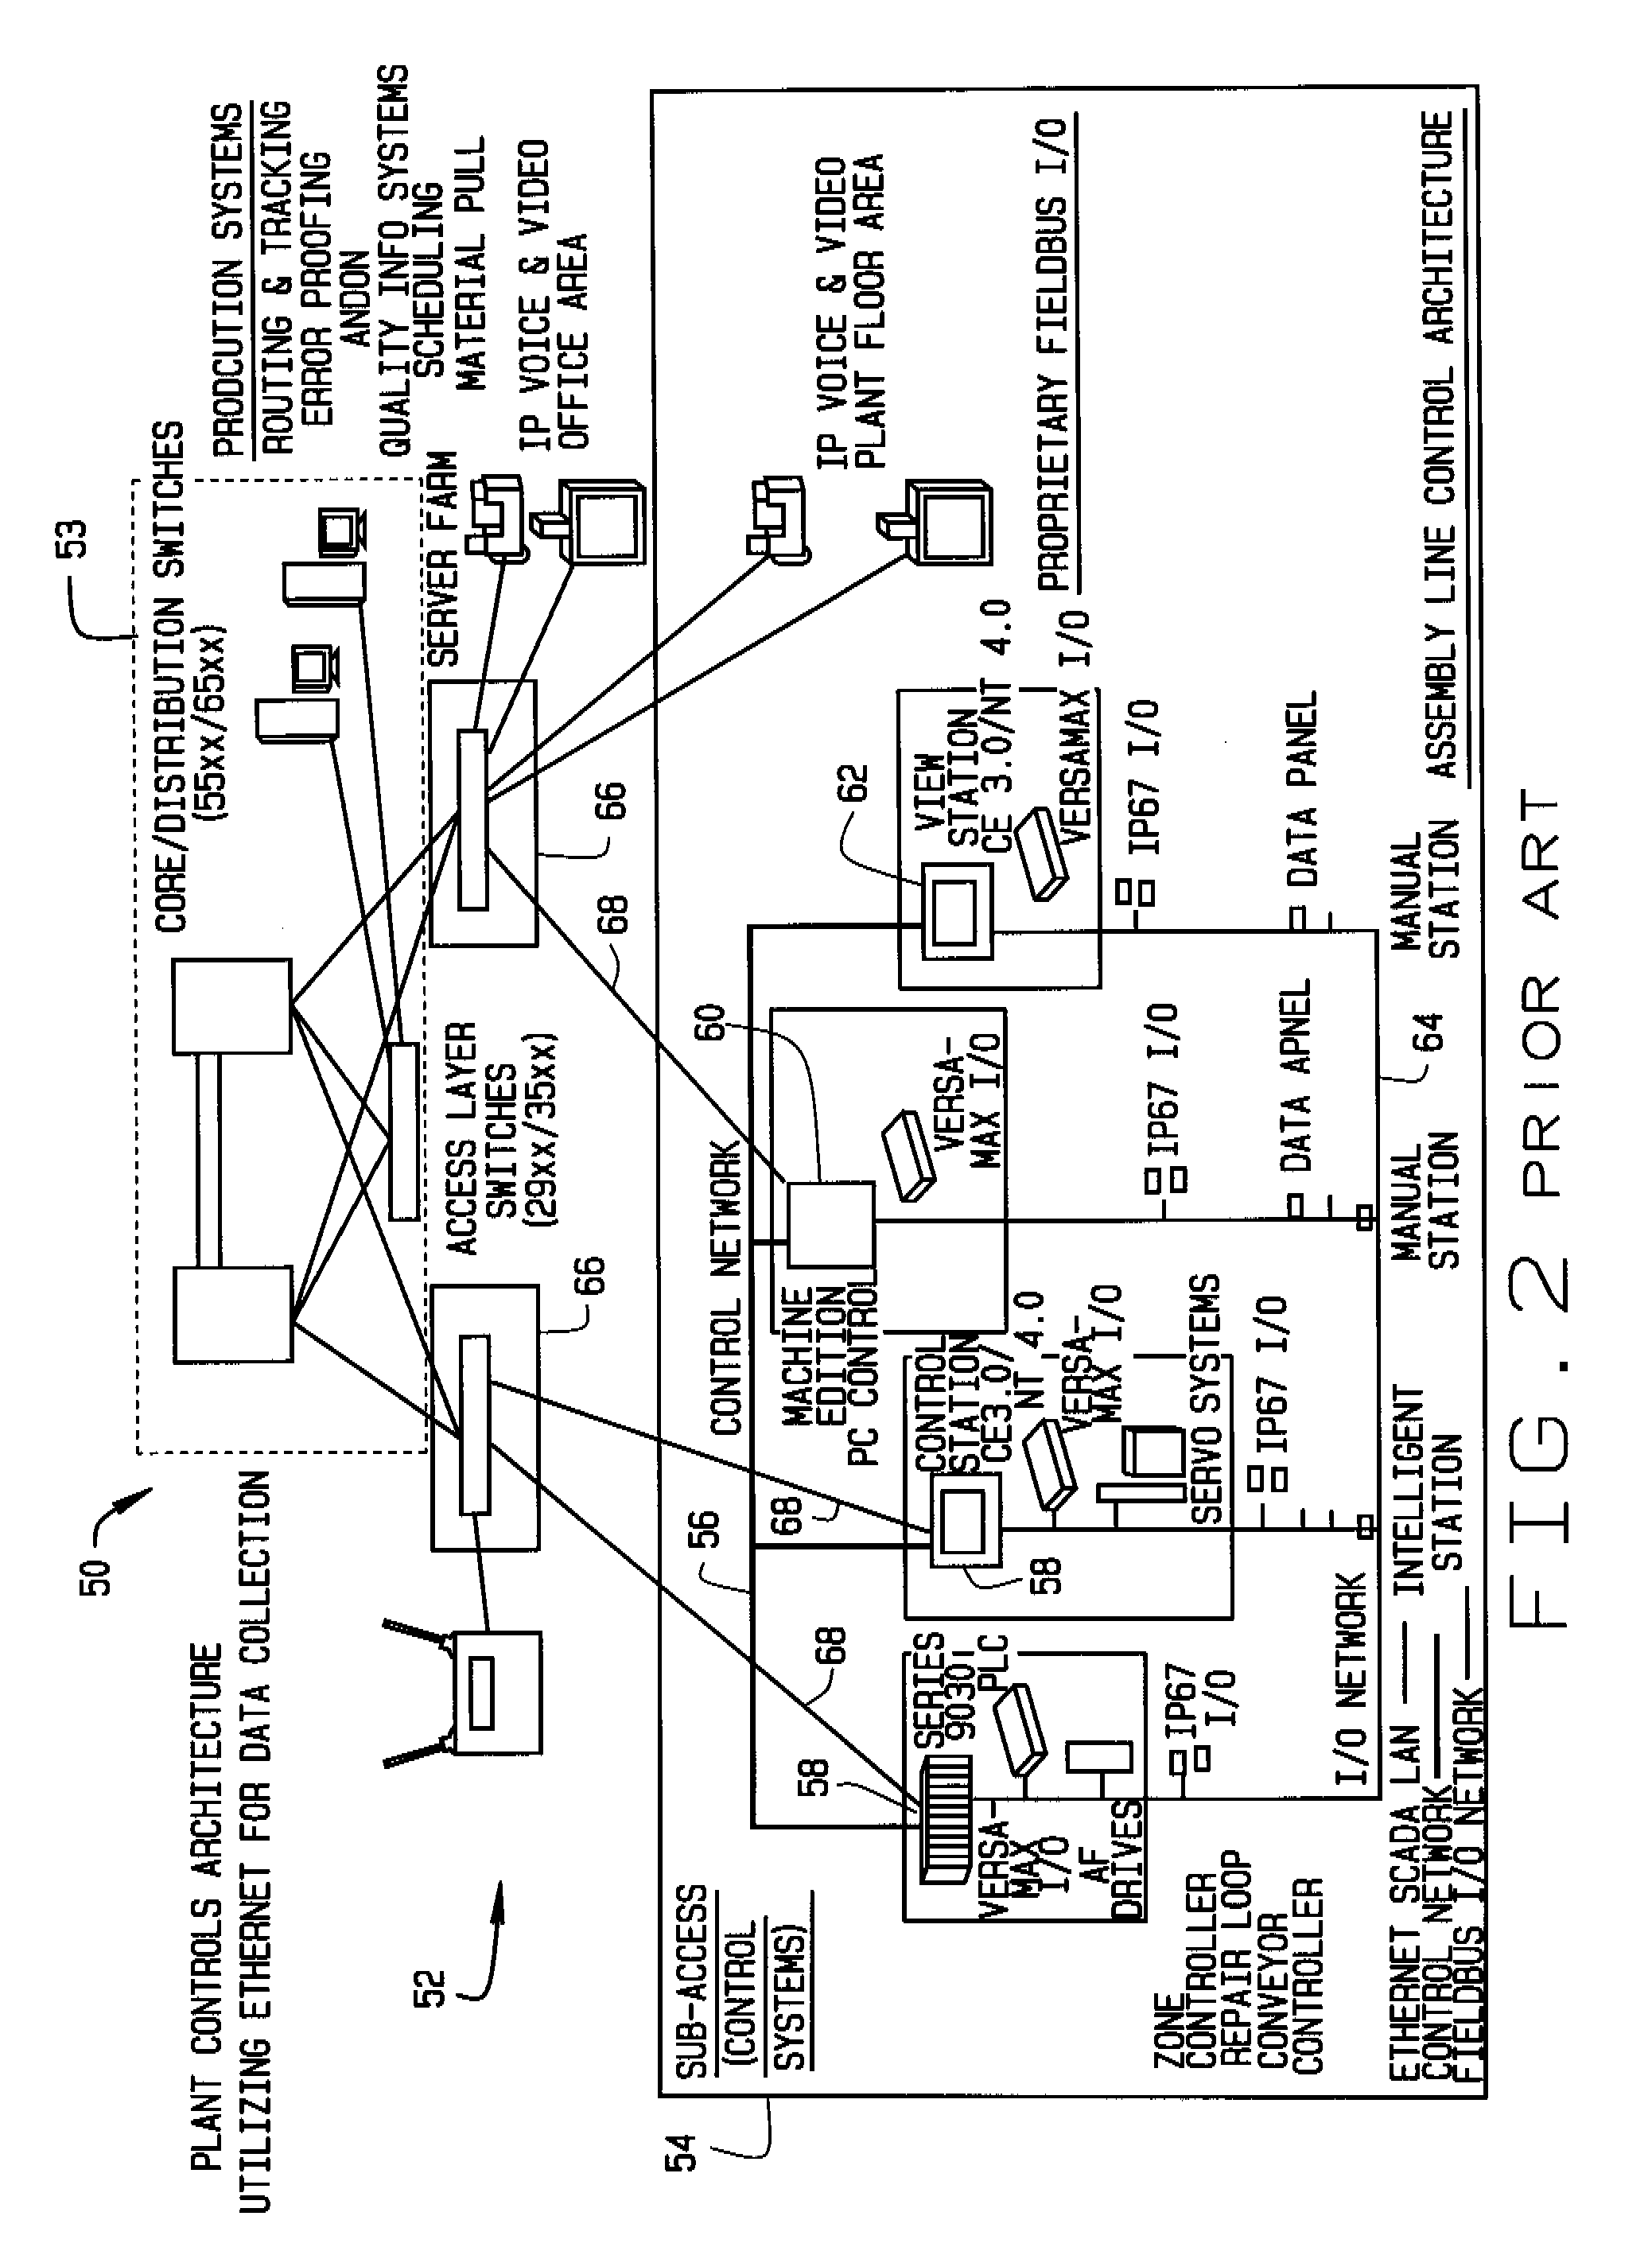 Ethernet switch and system